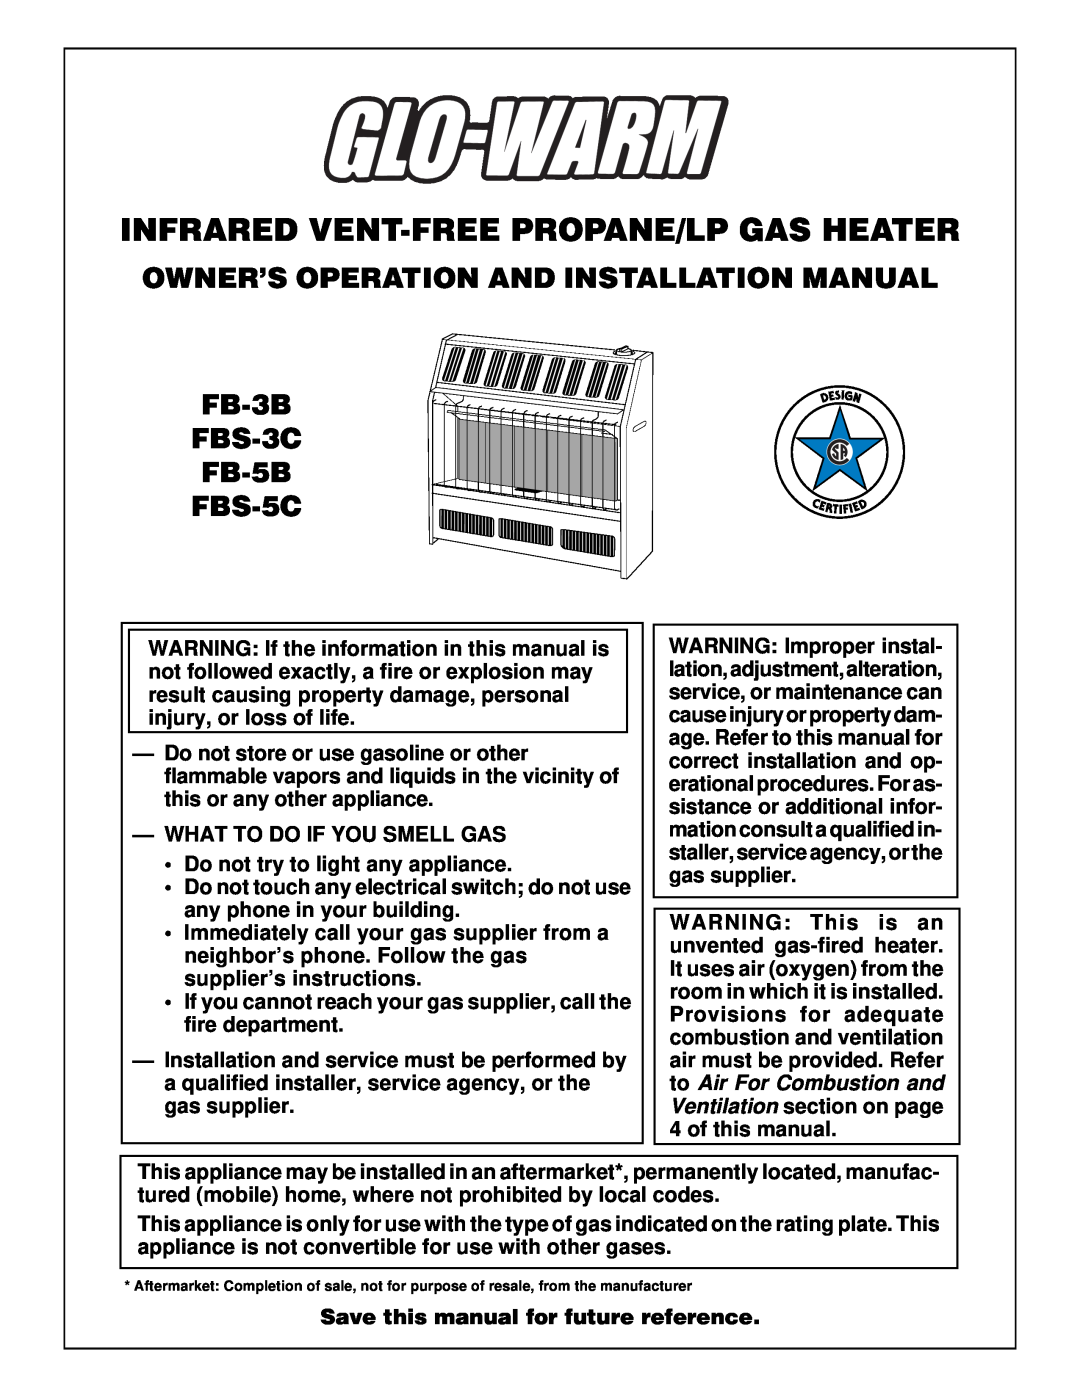 Desa FB-3B installation manual Infrared Vent-Free Propane/Lp Gas Heater, Installation and service must be performed by 